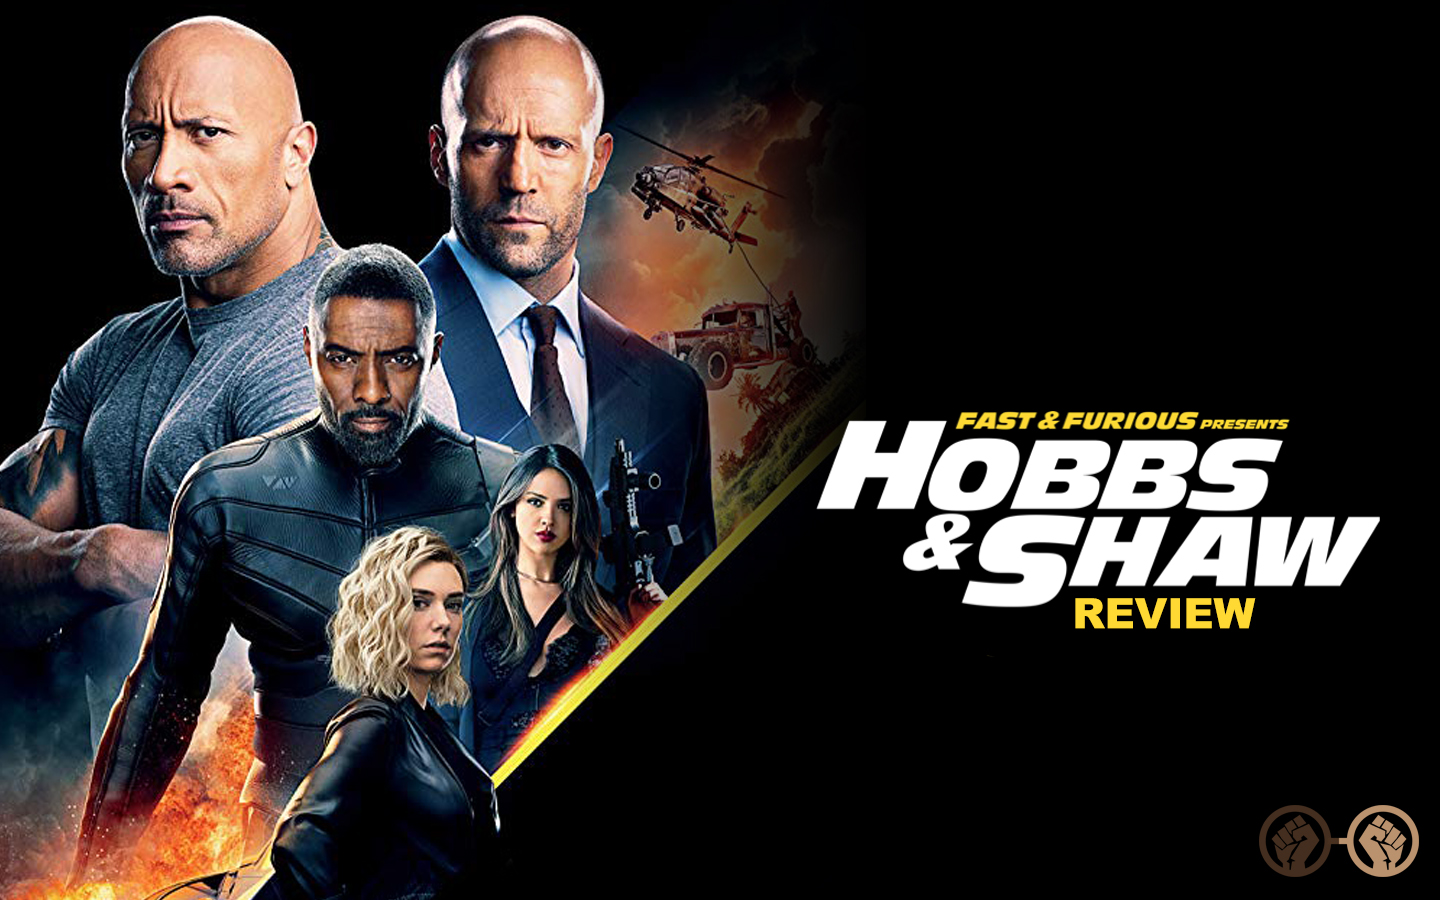 ‘Hobbs & Shaw’ Tries to Keep Pace With the Films in the ‘Fast & Furious’ Franchise – Review